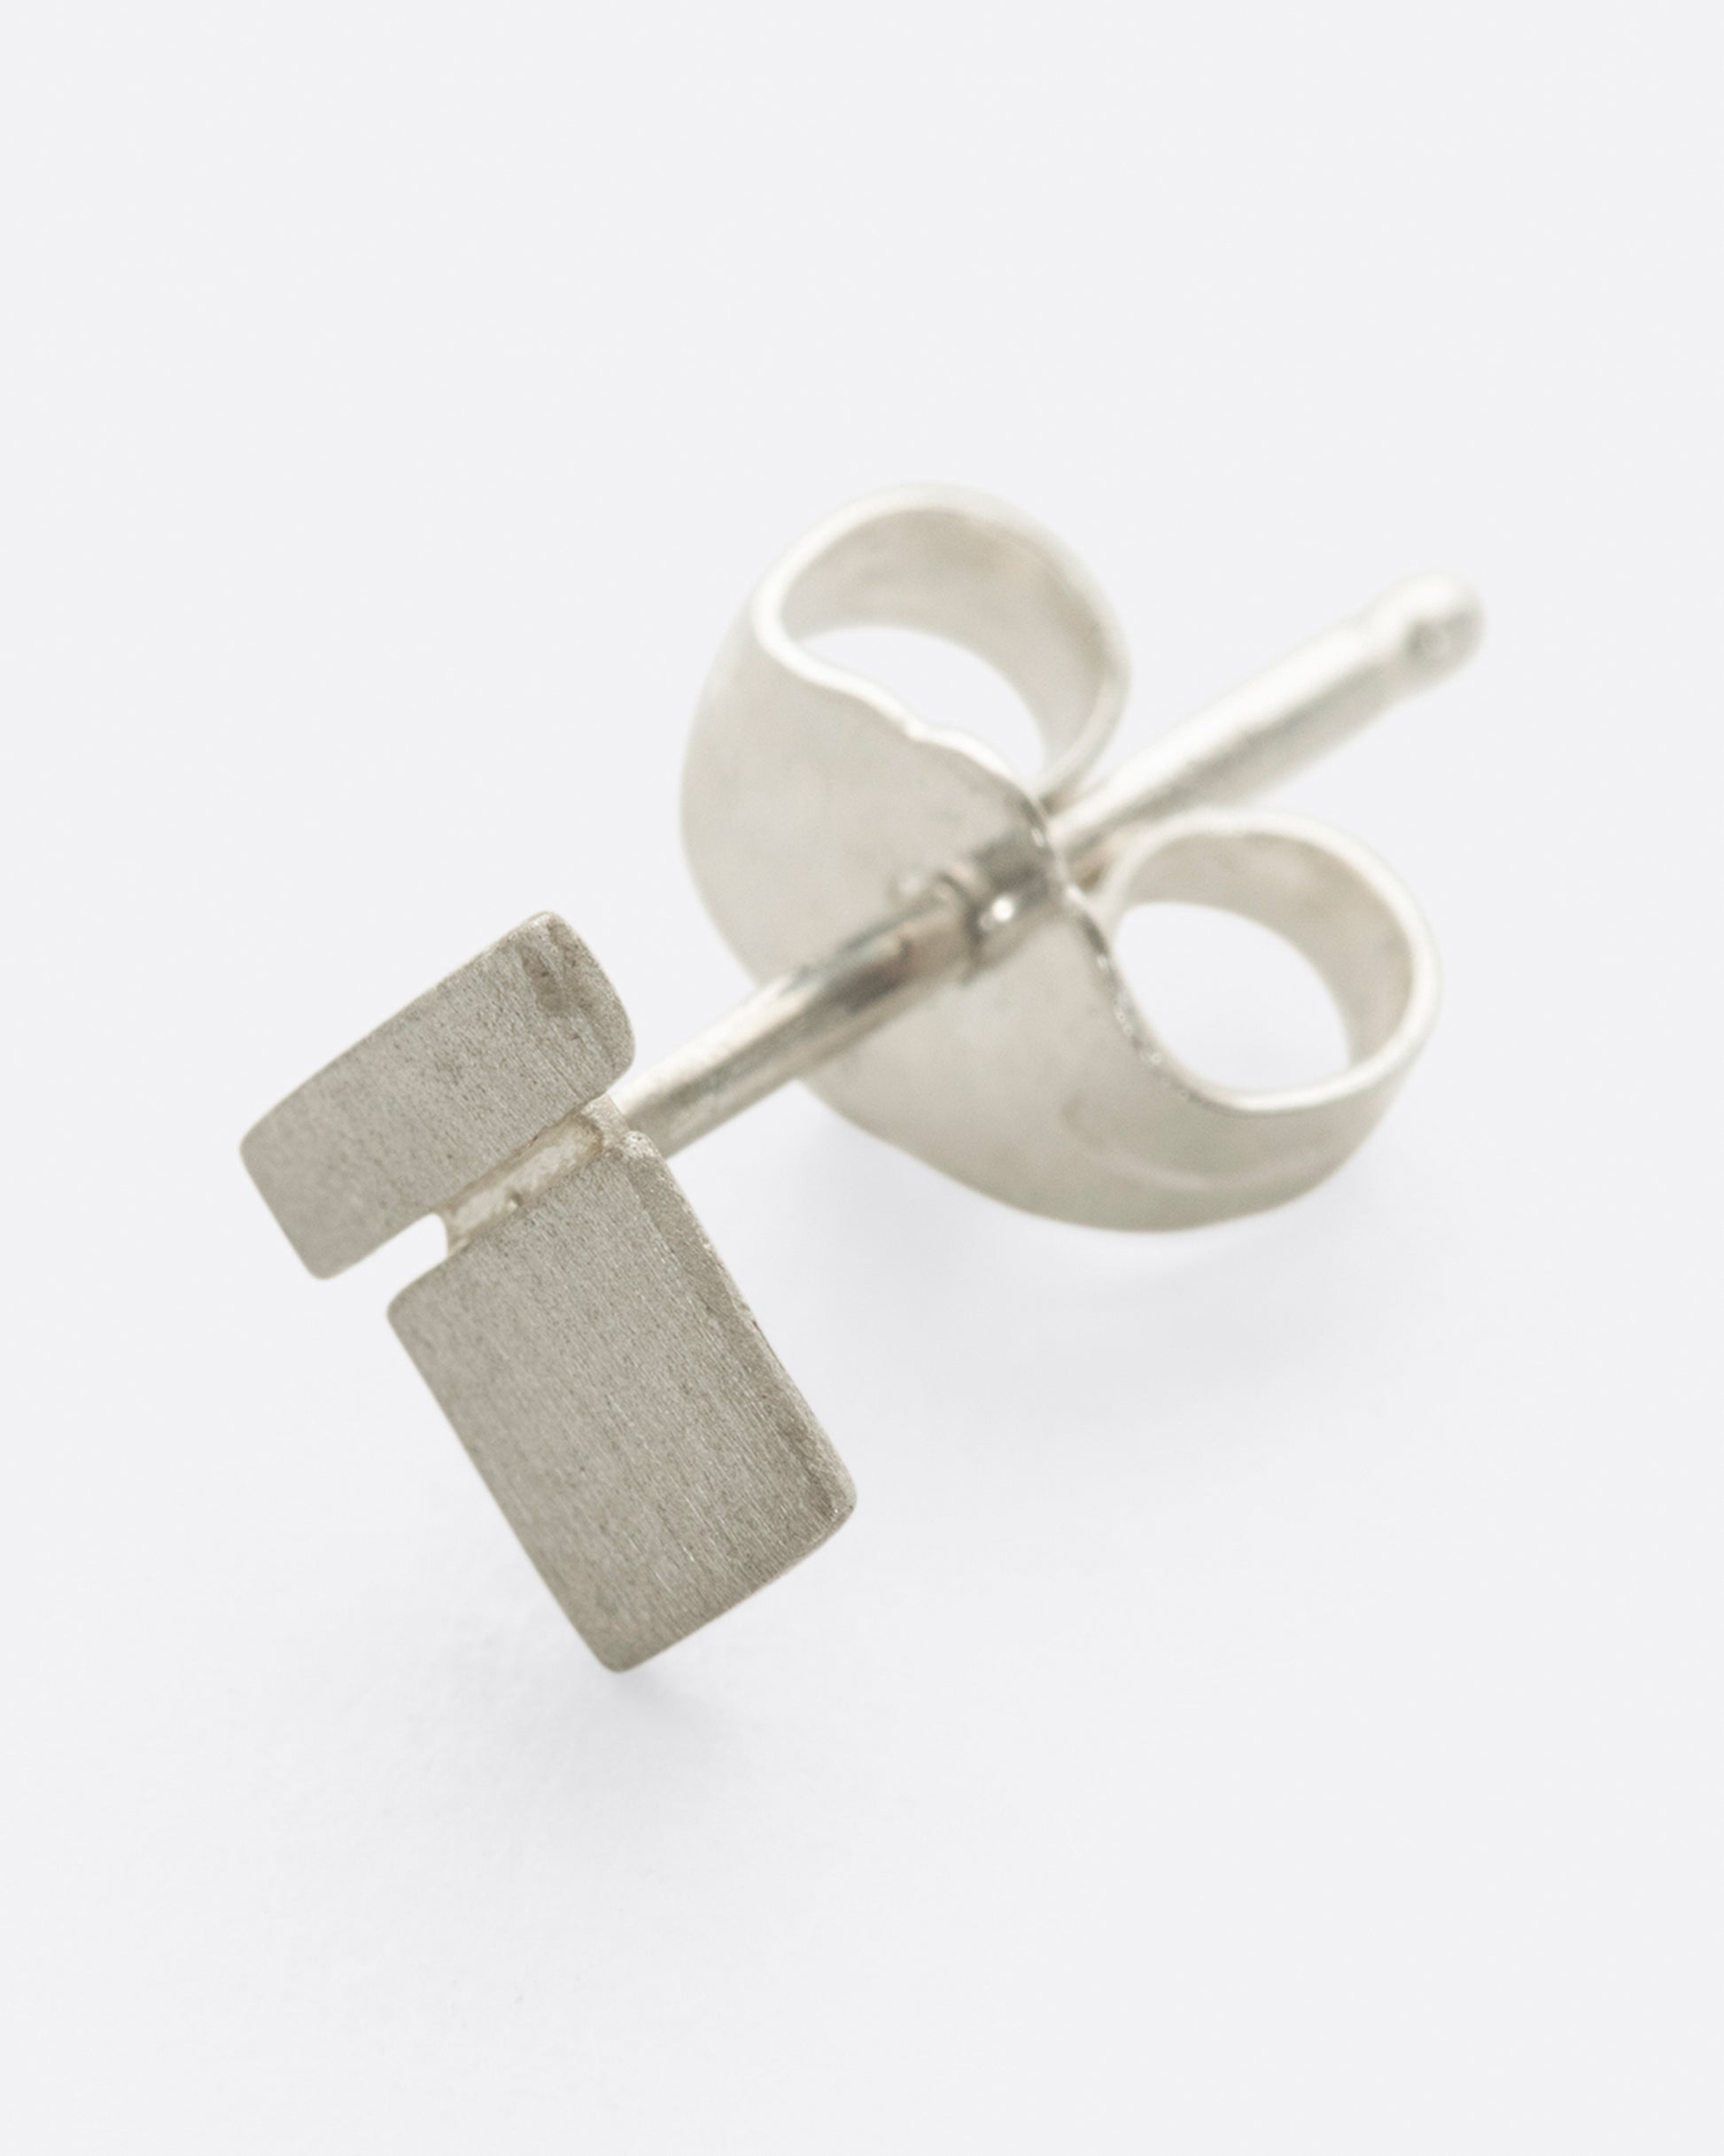 A brushed sterling silver earring with a bar on a square.